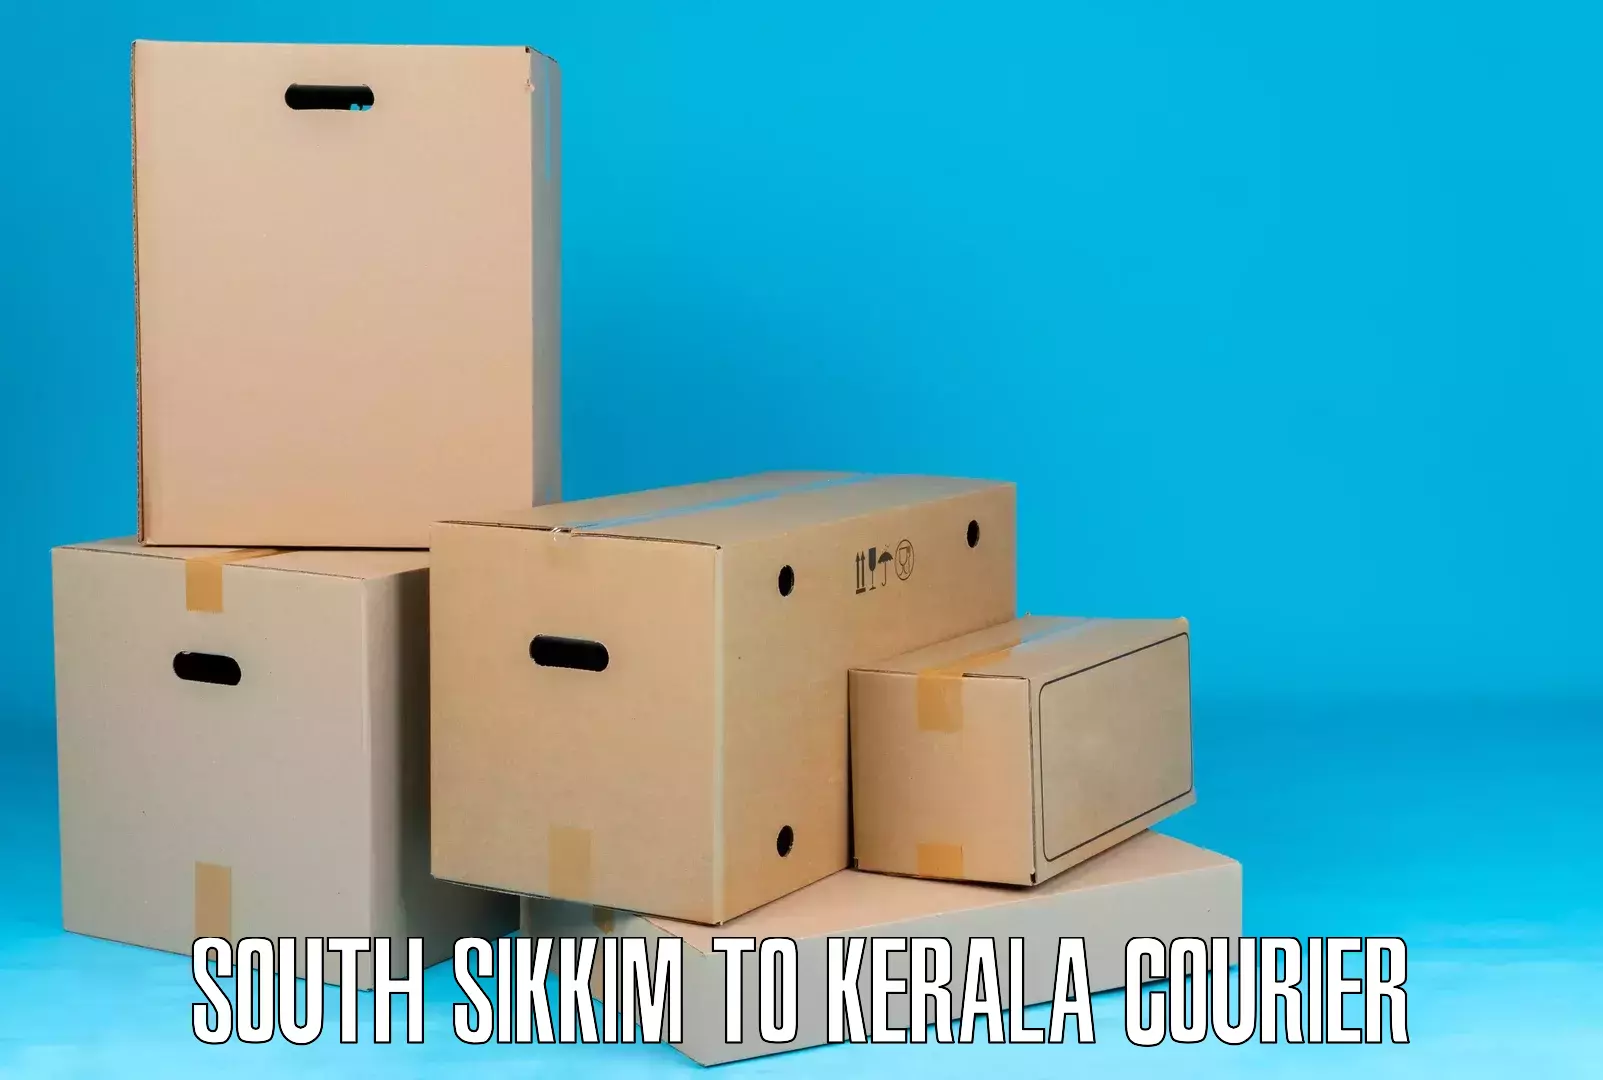 Supply chain efficiency South Sikkim to North Paravur